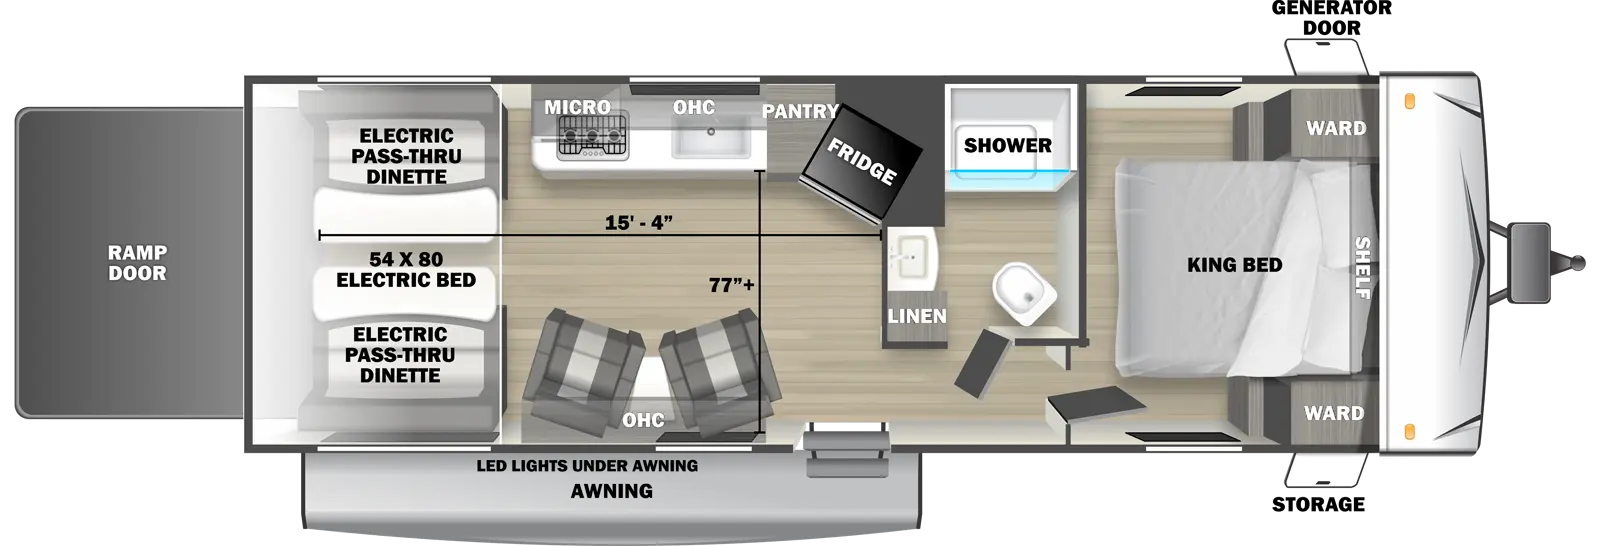 The 2500RLS travel trailer has no slide outs, 1 entry door and 1 rear ramp door. Exterior features include an awning with LED lights, front door side storage and front off-door side generator door. Interior layout from front to back includes: front bedroom with foot-facing King bed, shelf over the bed, and front corner wardrobes; off-door side bathroom with shower, linen storage, toilet and single sink vanity; off-door side kitchen with overhead microwave, overhead cabinets, pantry, stovetop and angled refrigerator; 2 door side recliners with end table; and rear electric 60 x 80 bed with opposing side electric pass-through dinette. Cargo length from rear of unit to kitchen wall is 15 ft. 4 in. Cargo width from kitchen countertop to door side wall is 77 inches.